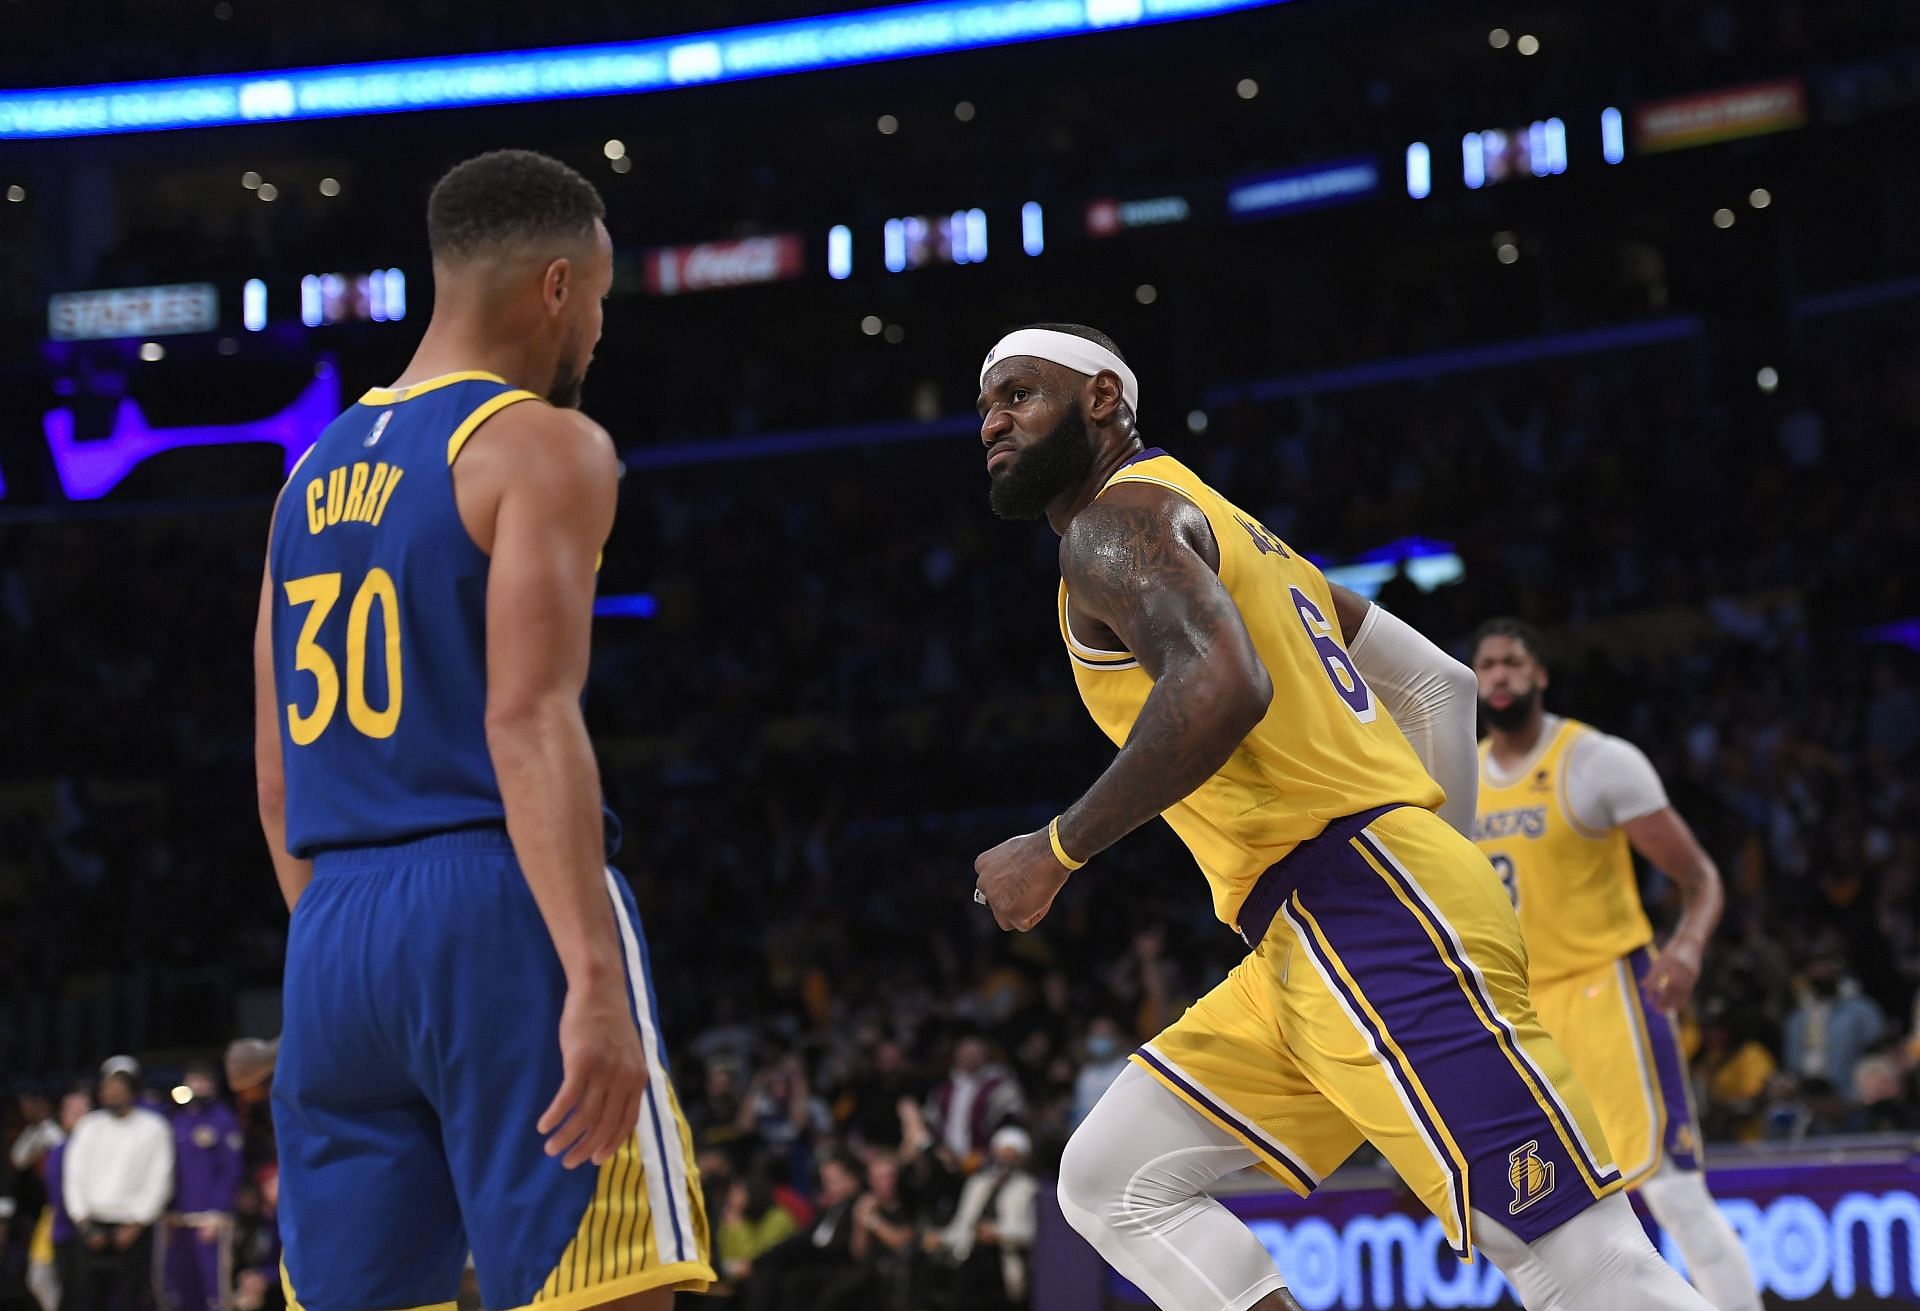 LeBron James (right) against Stephen Curry of the Golden State Warriors on 2021 opening night